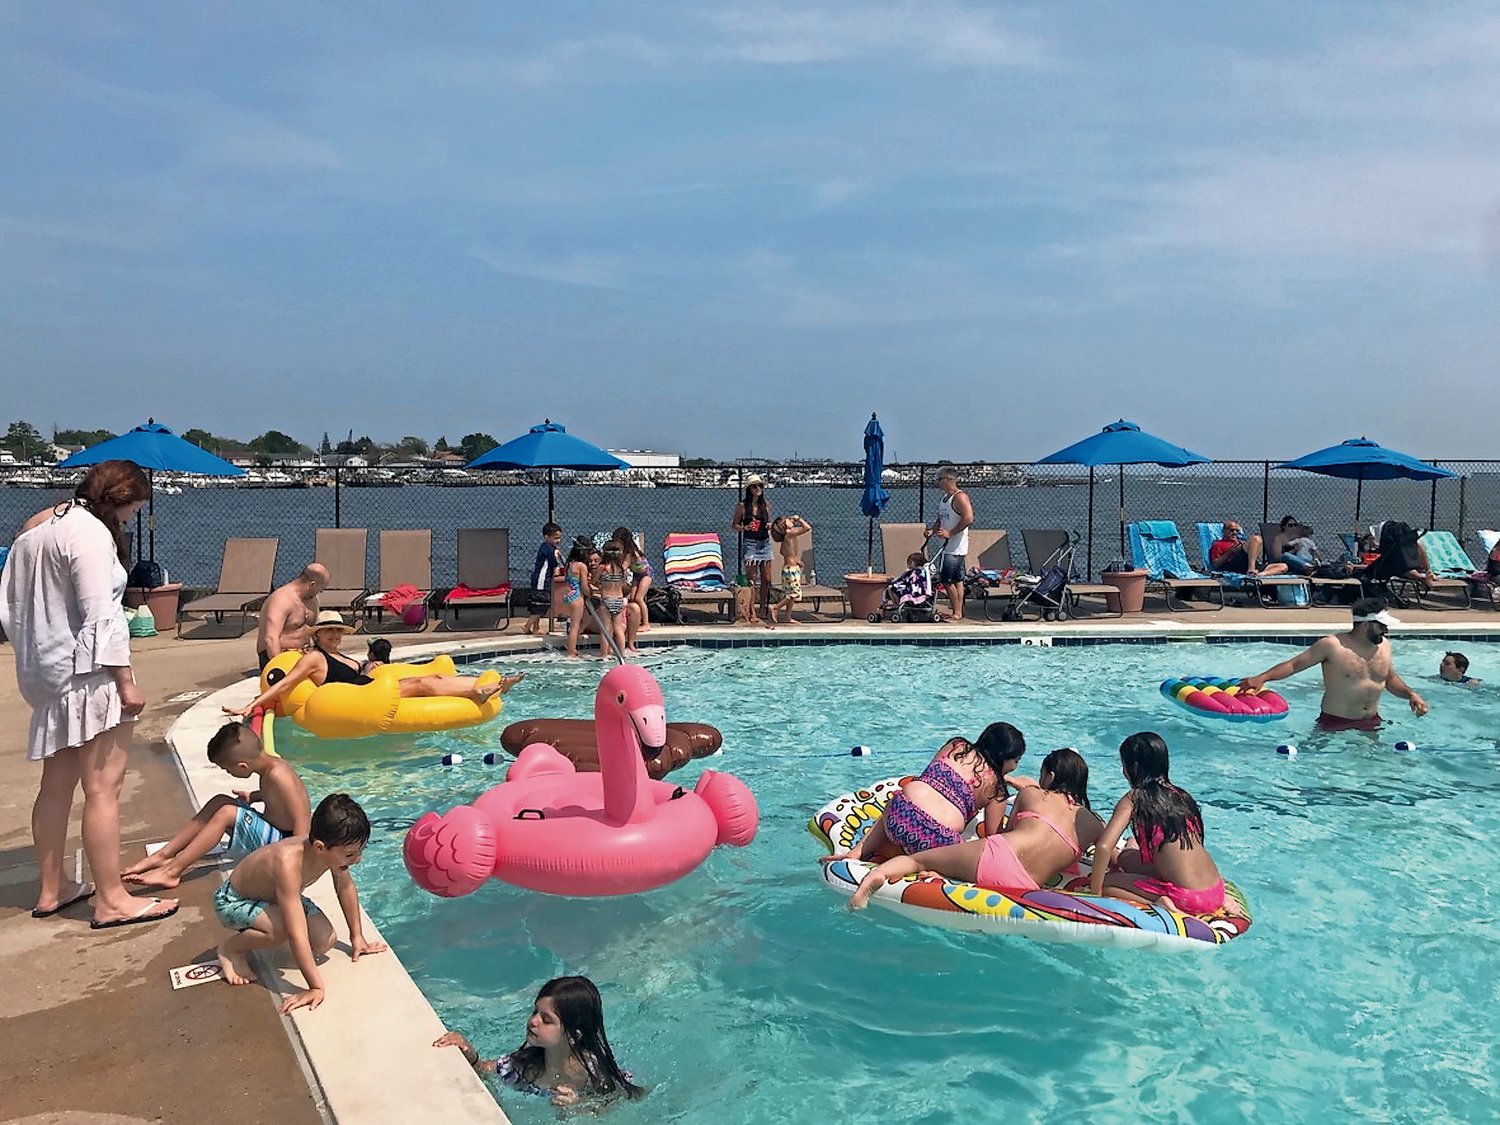 Local families have enjoyed MECA’s amenities for the past 60 years. Dozens gathered in the pool in 2019, before the pandemic forced MECA to close for the 2020 season.